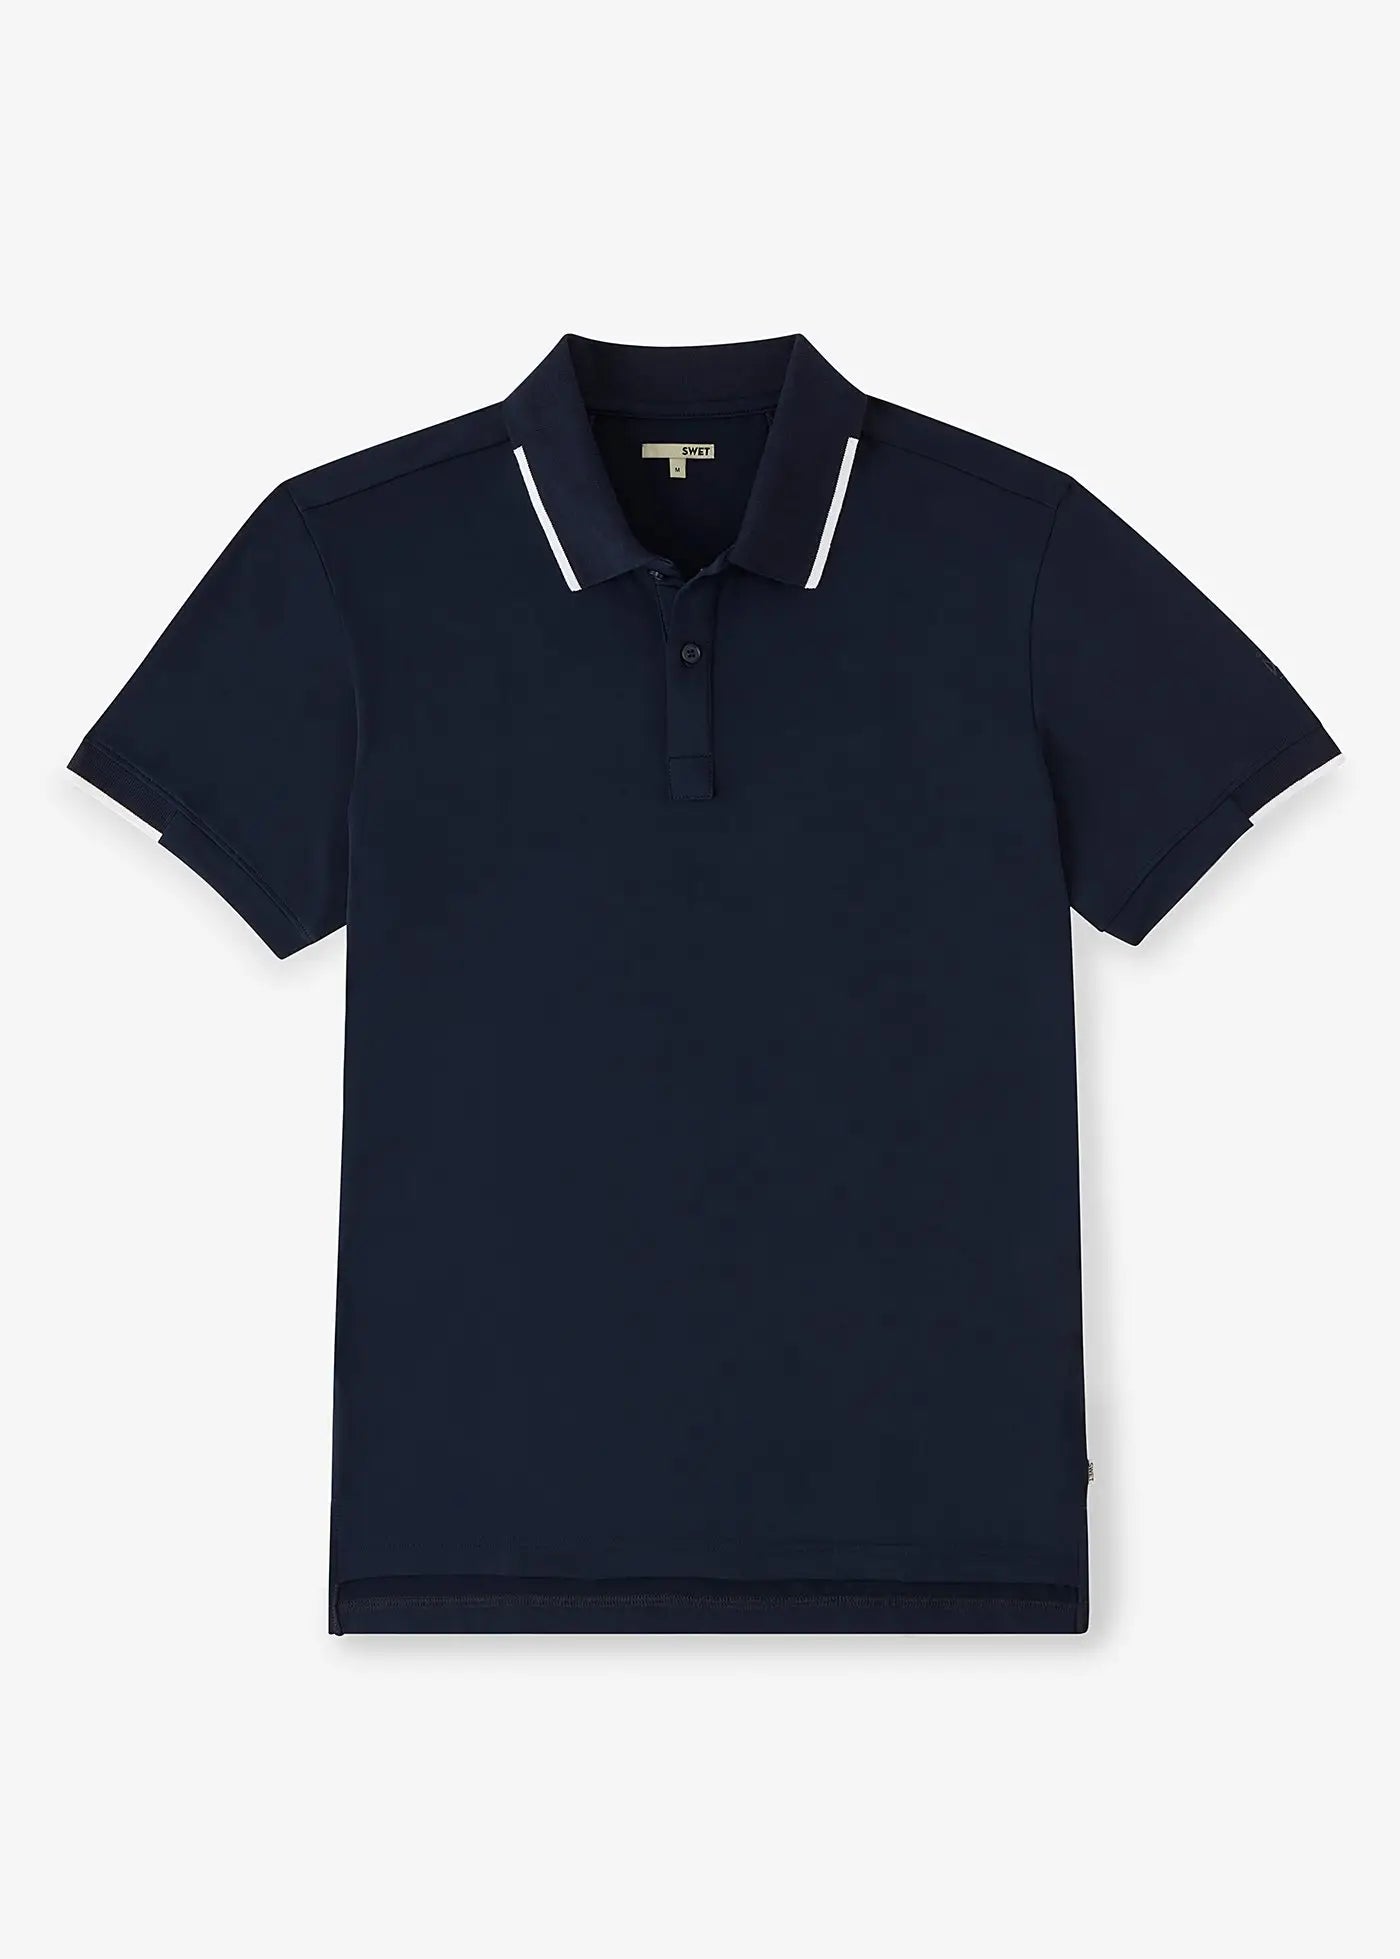 Swet Tailor - Performance Polo Navy